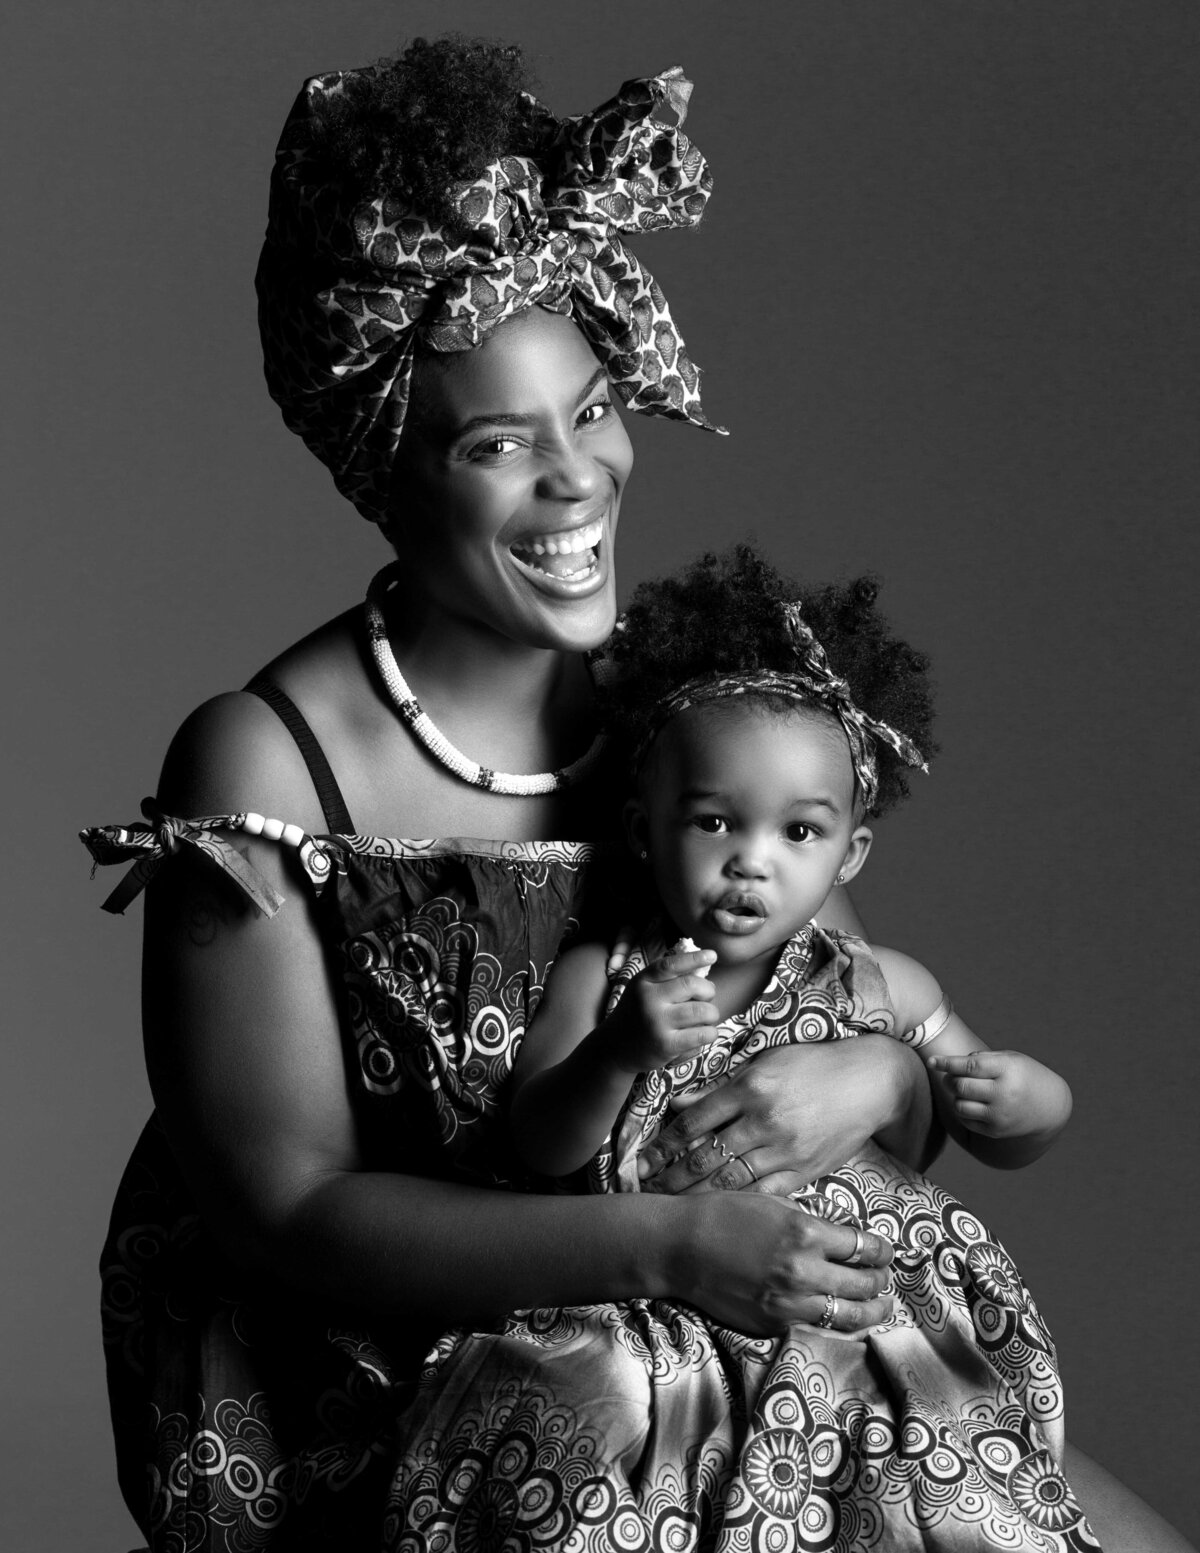 Black and white fashion portrait of a mom and her daughter